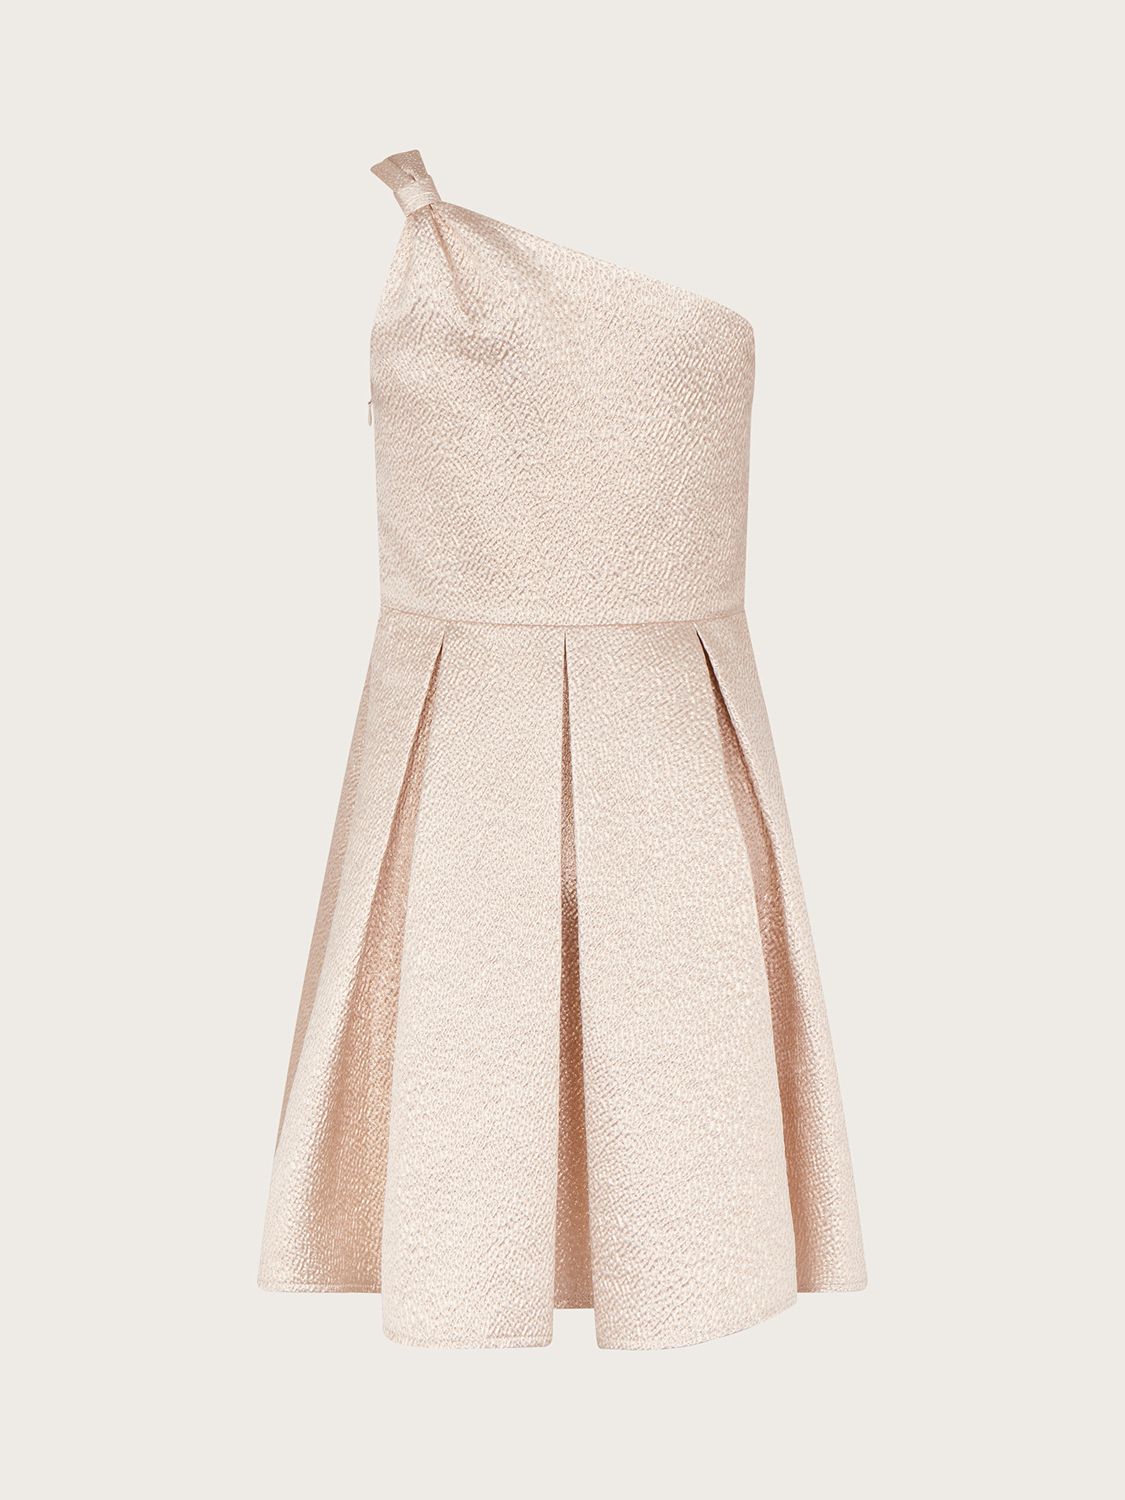 Buy Monsoon Kids' Jacquard Pleated Bow Dress, Gold Online at johnlewis.com